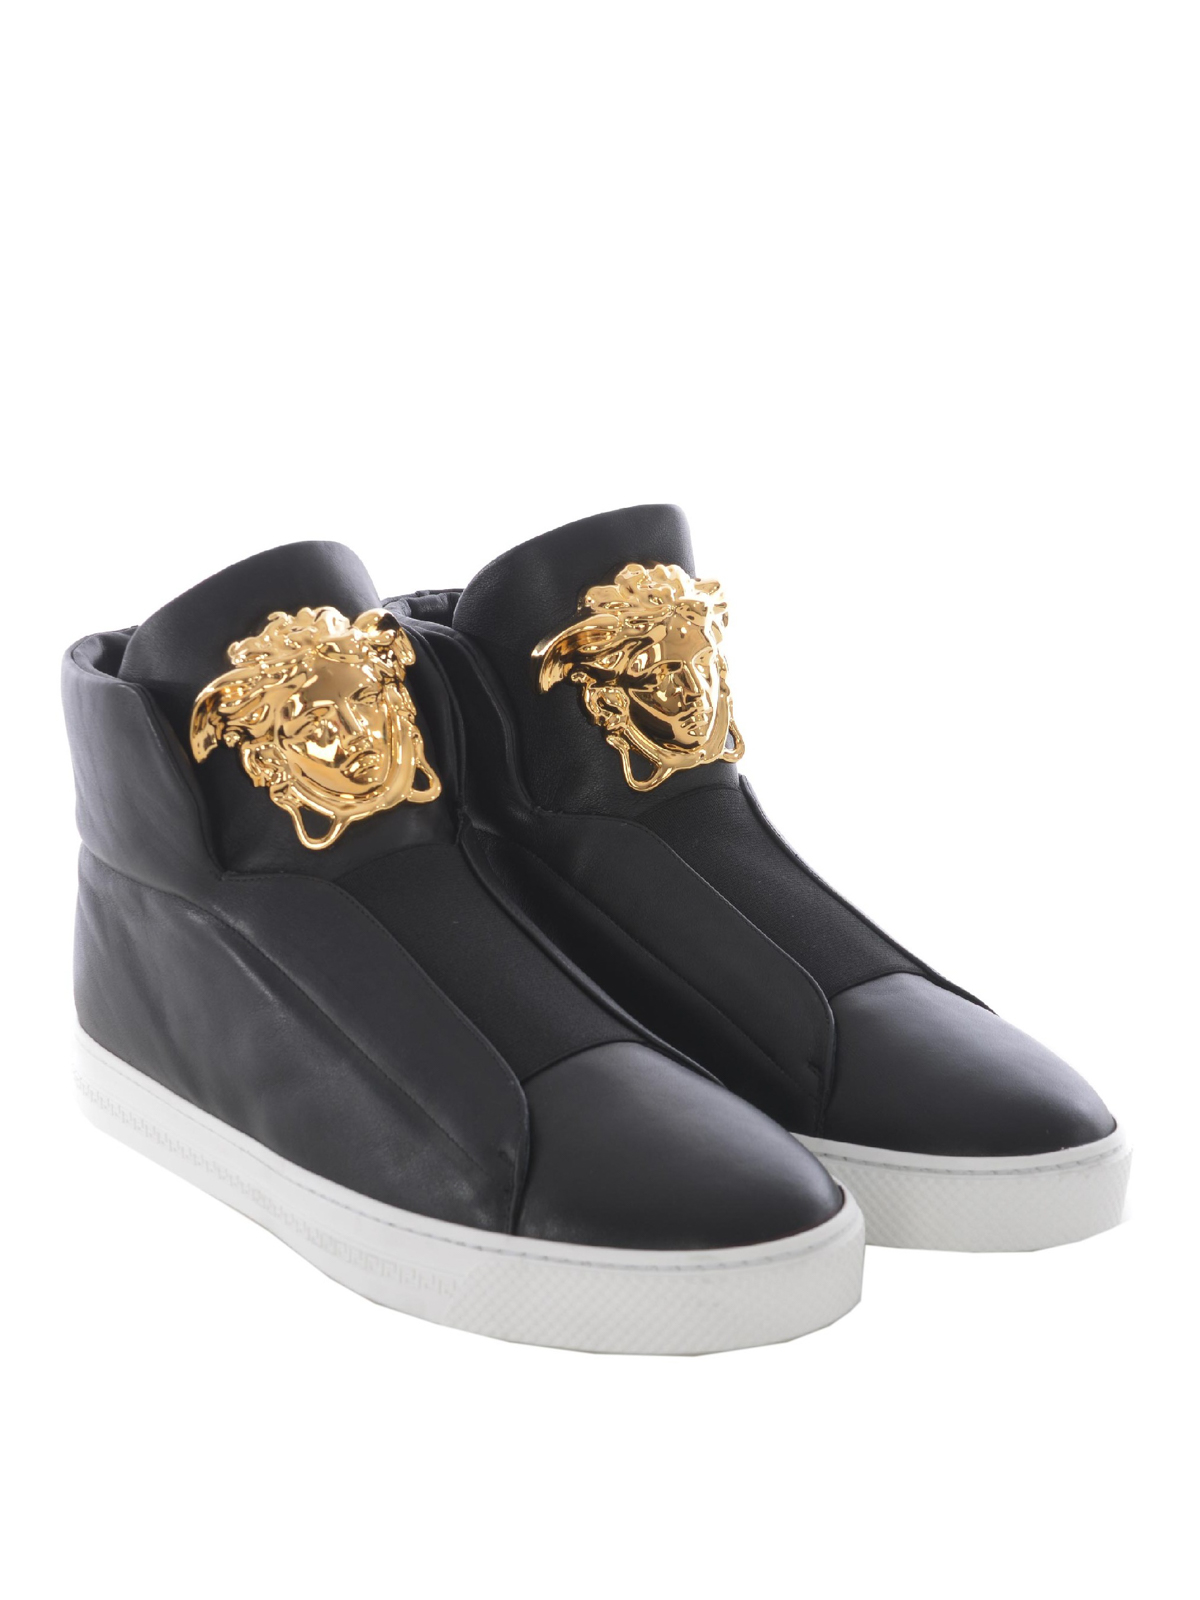 Versace - Palazzo leather sneakers 